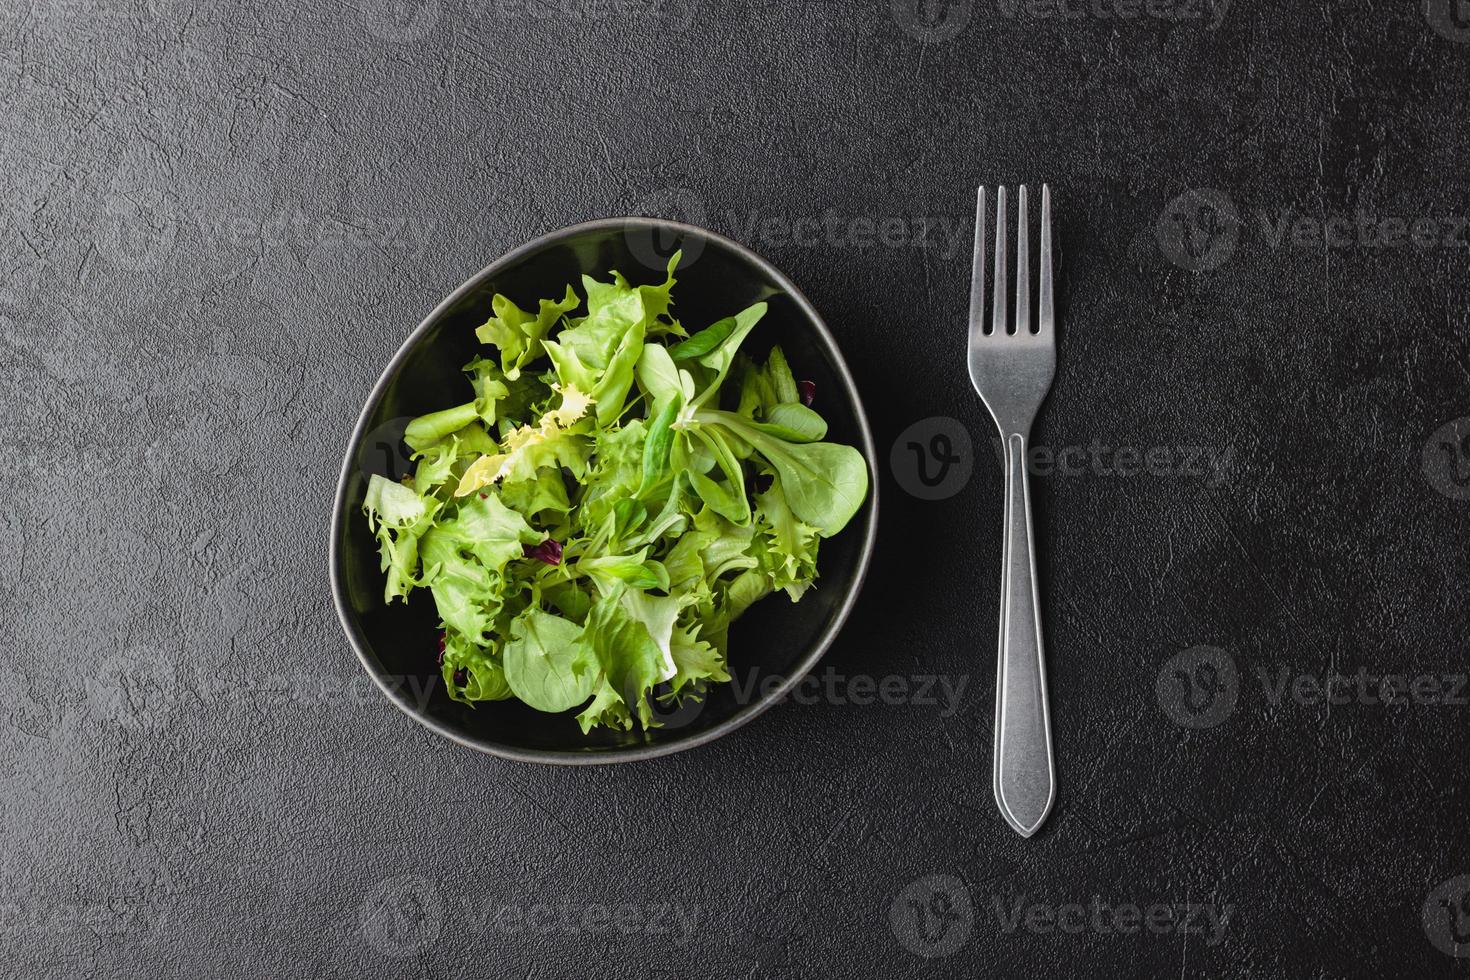 Green salad leaves in bowl on black table. photo